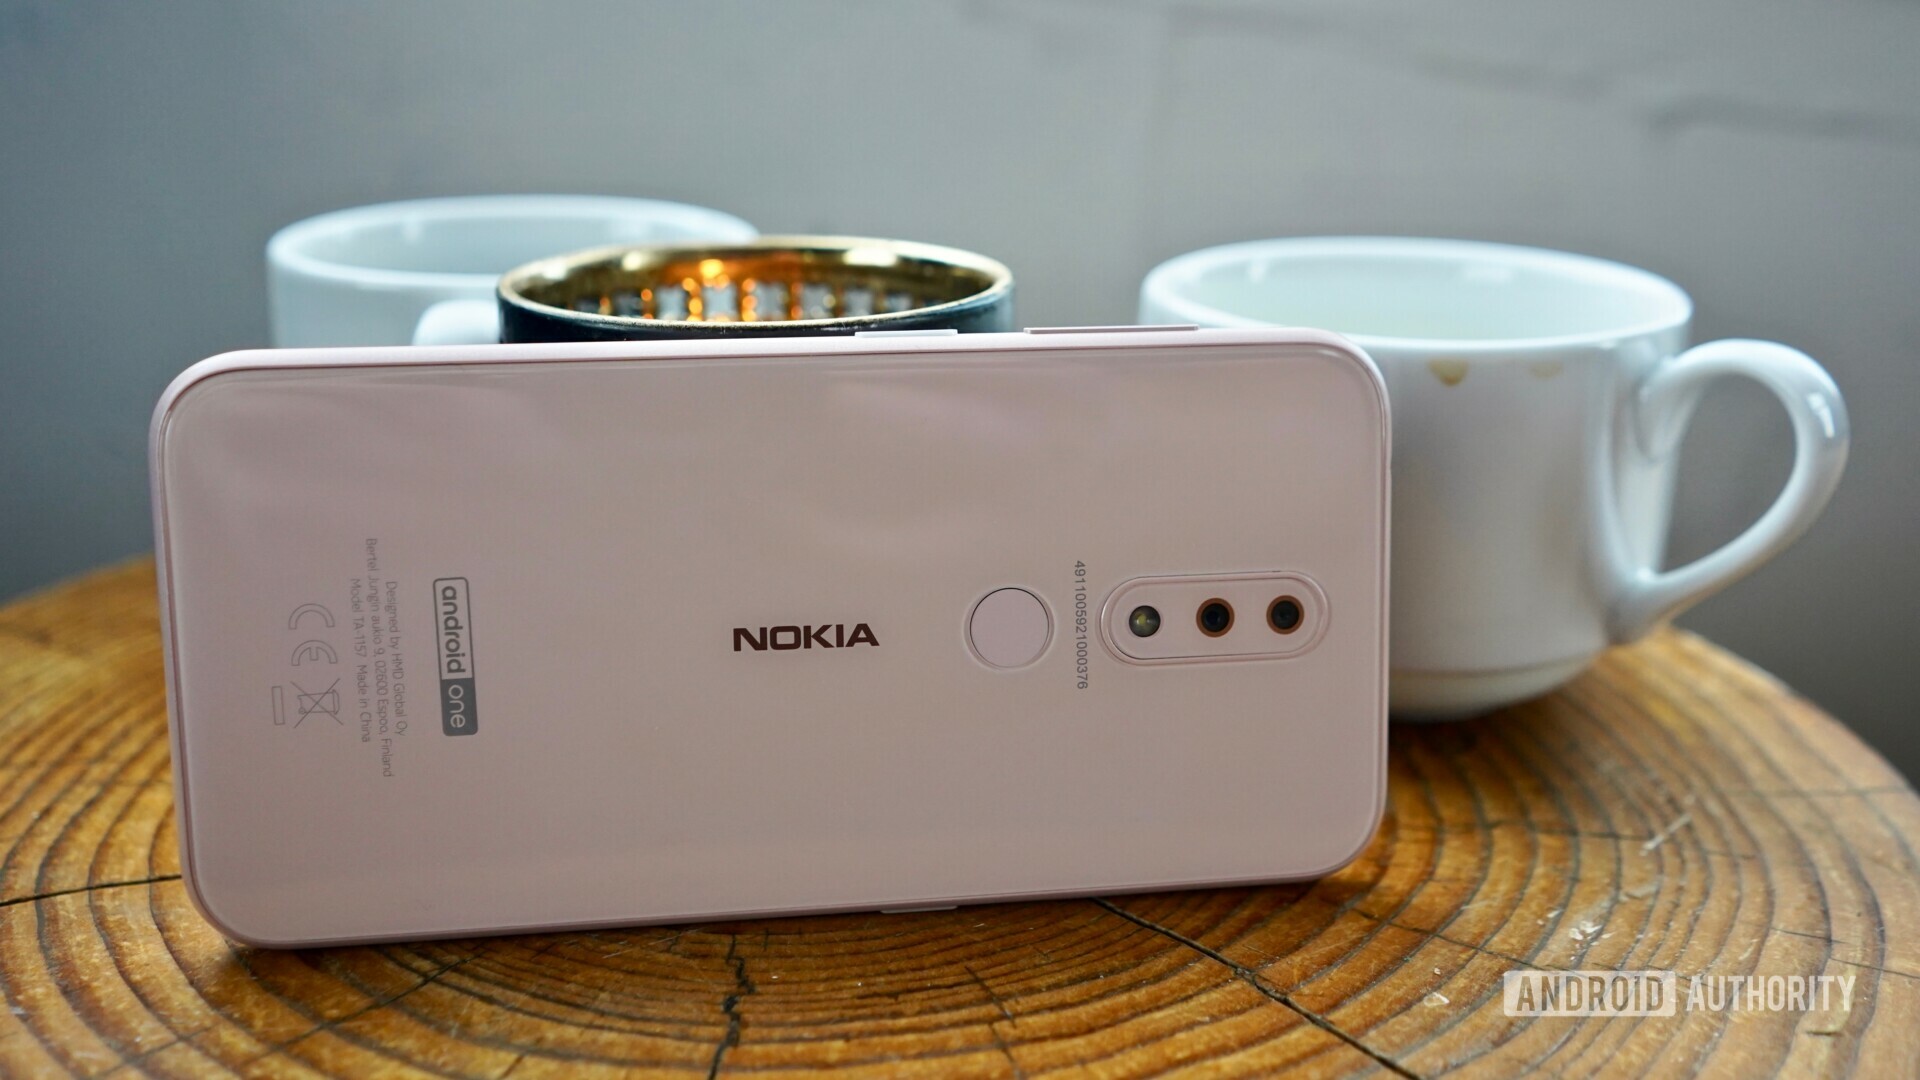 Nokia smartphones like the Nokia 4.2 should now be using Adaptive Battery.